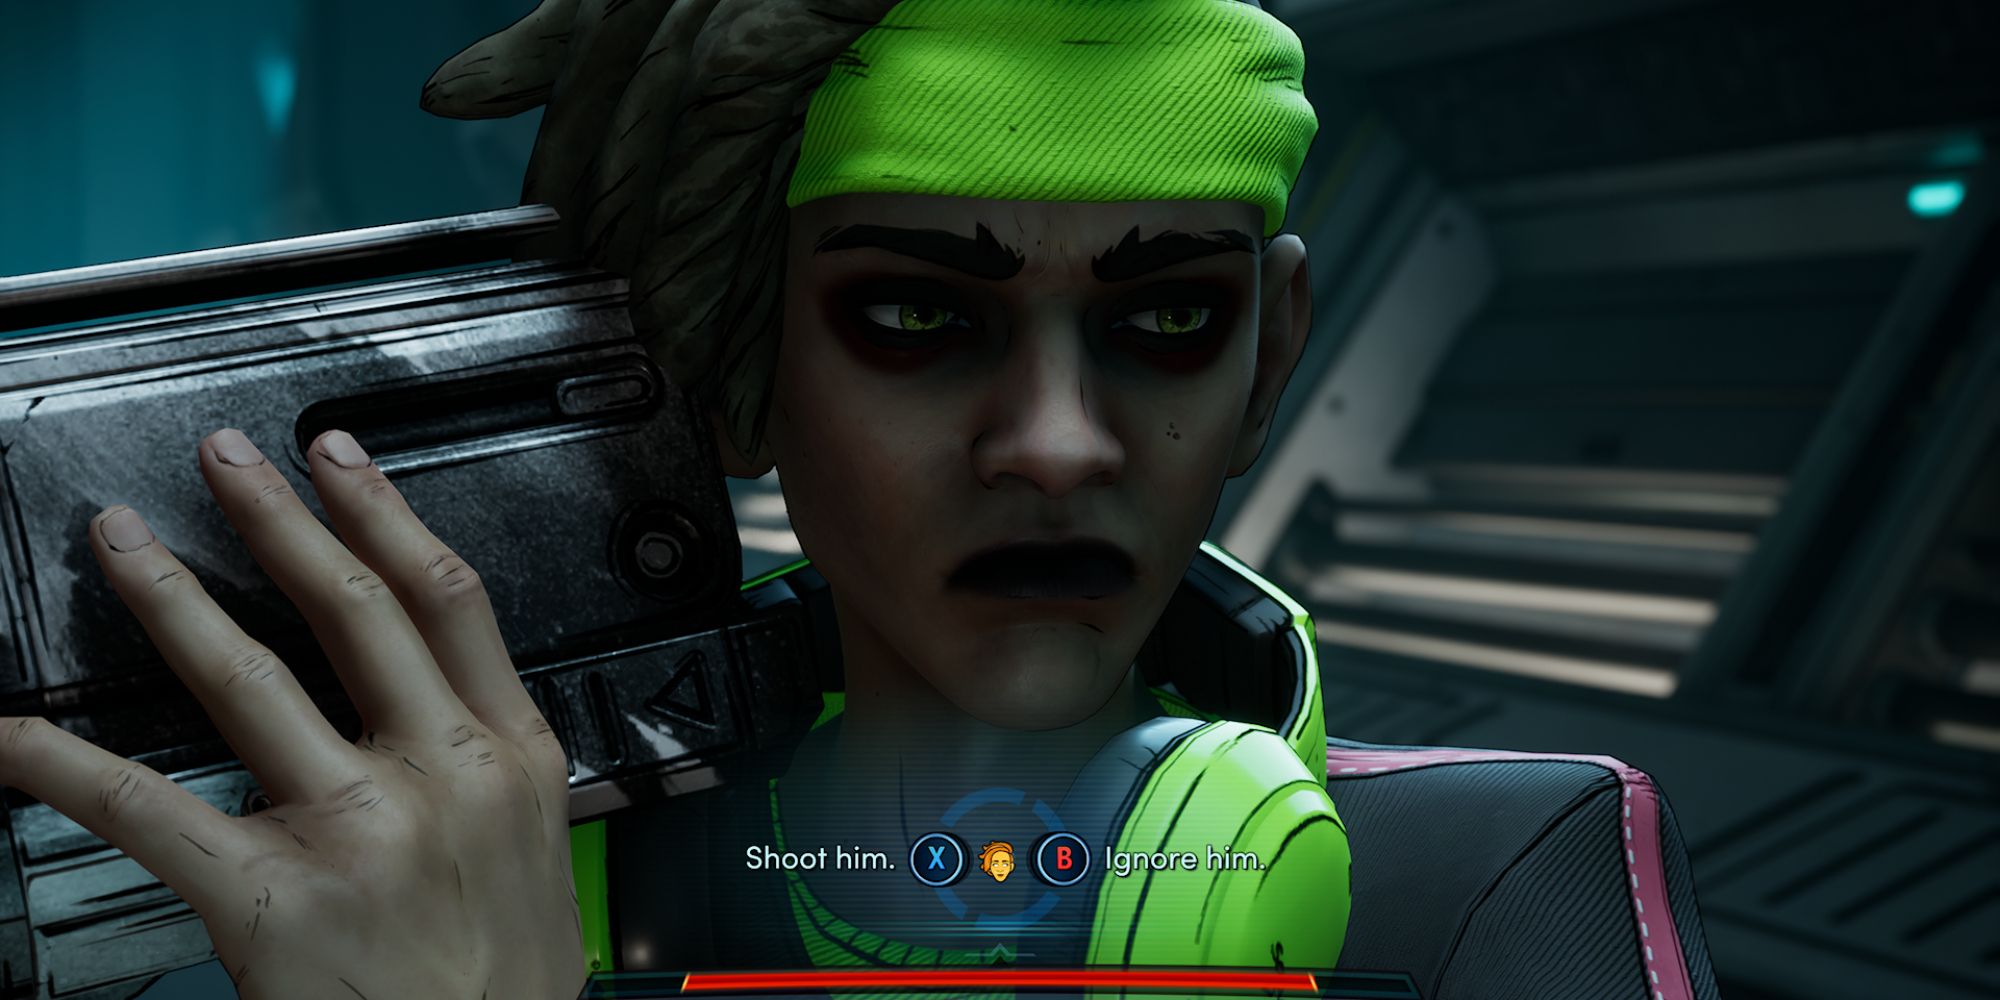 New Tales From The Borderlands Screenshot Of Octavio Shoot Or Ignore Idol